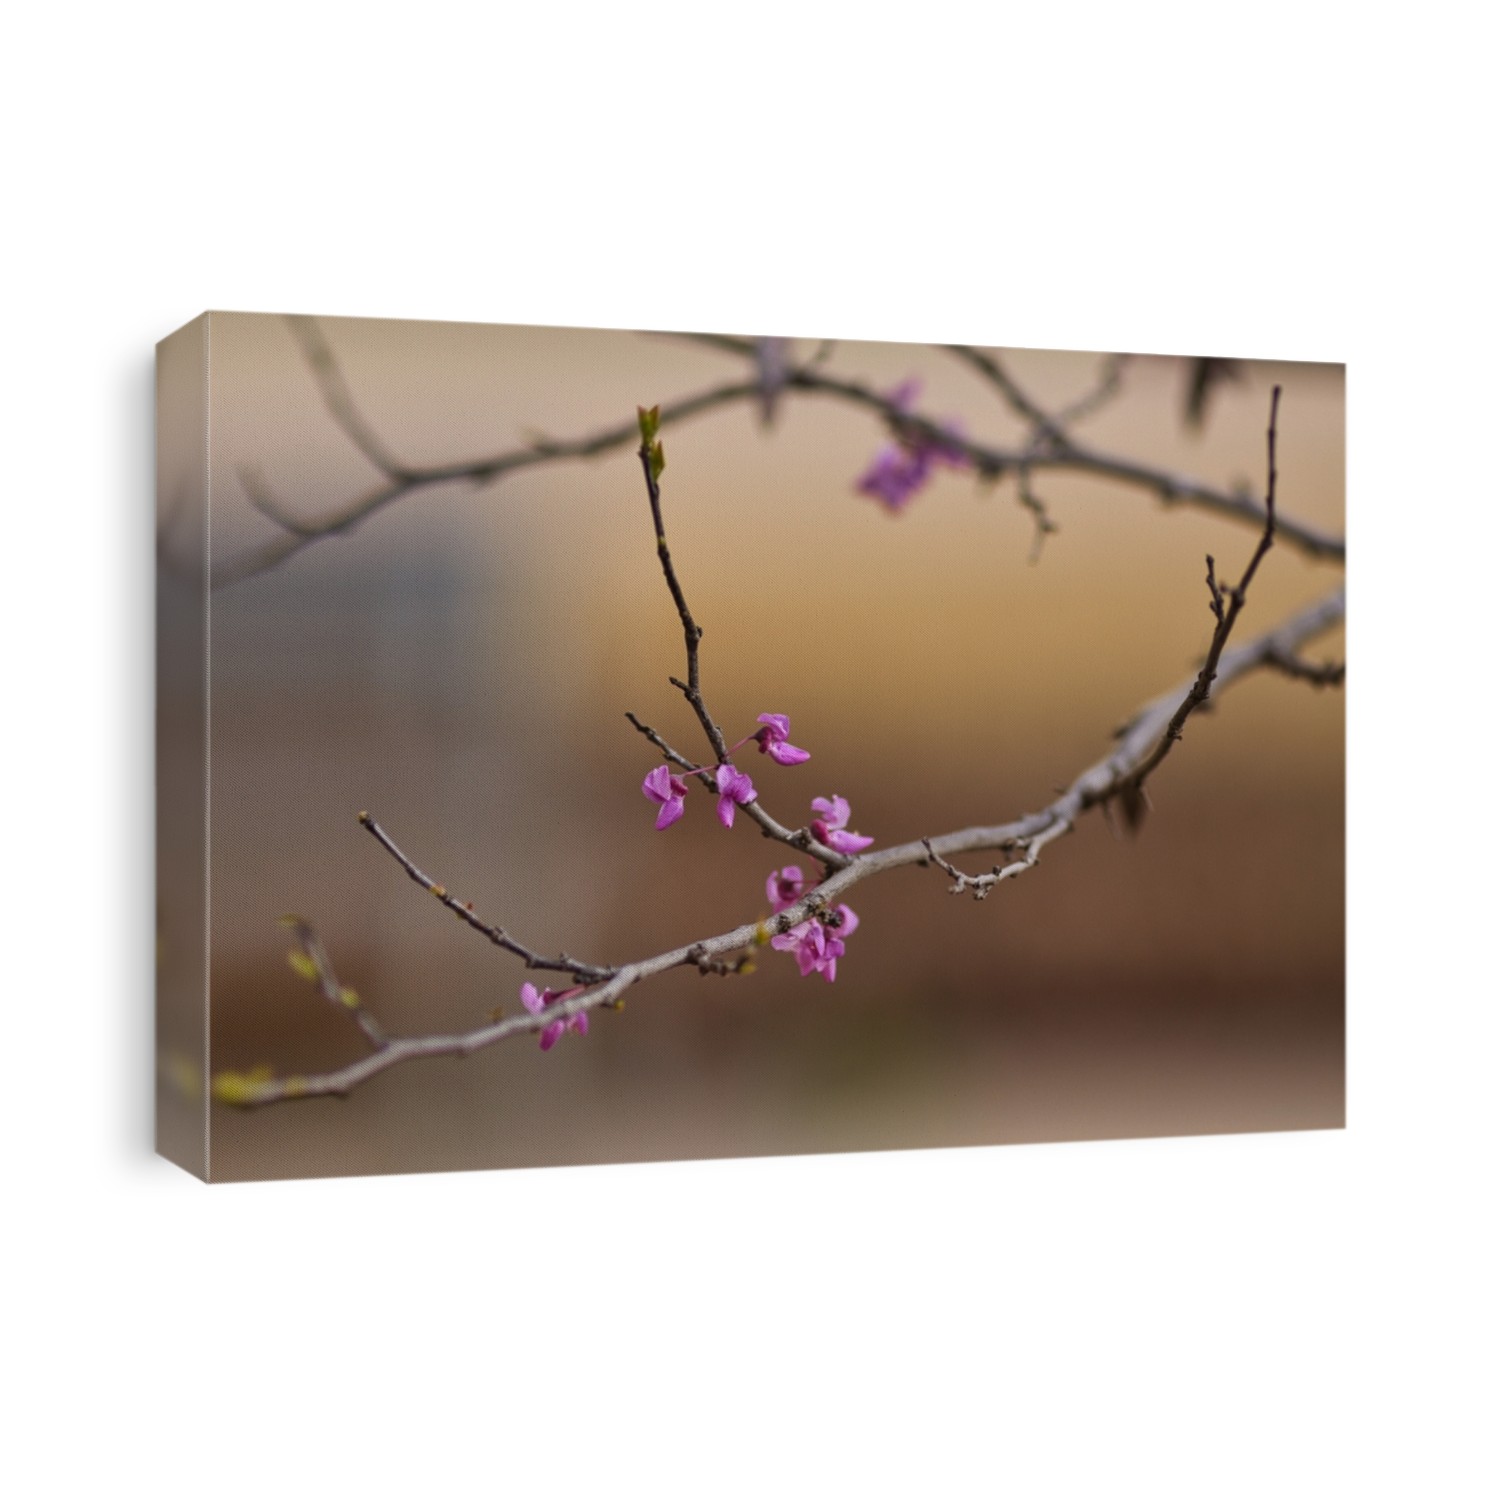 A close-up shot of branches of Eastern redbud tree isolated on a blurred background